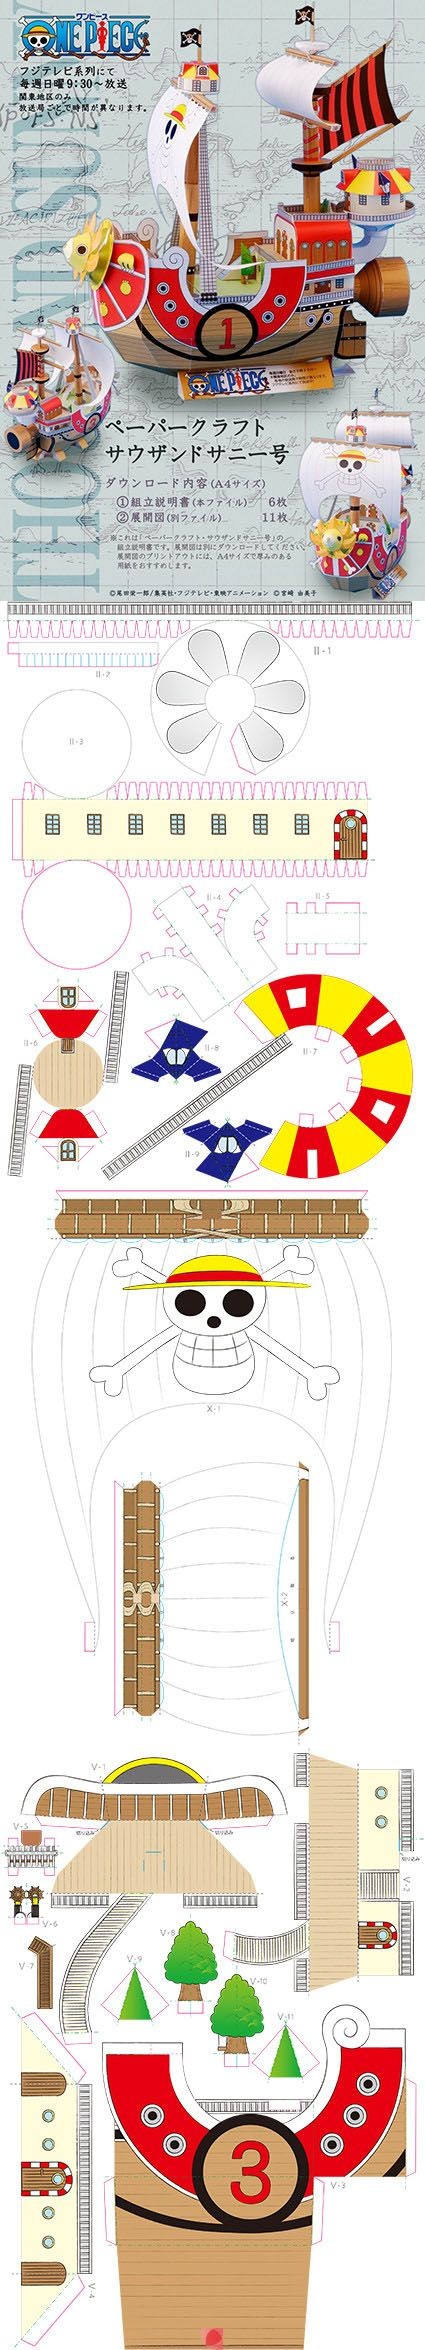 One Piece Papercraft One Piece My son Doesn T Watch the Show but He Loves Pirates and